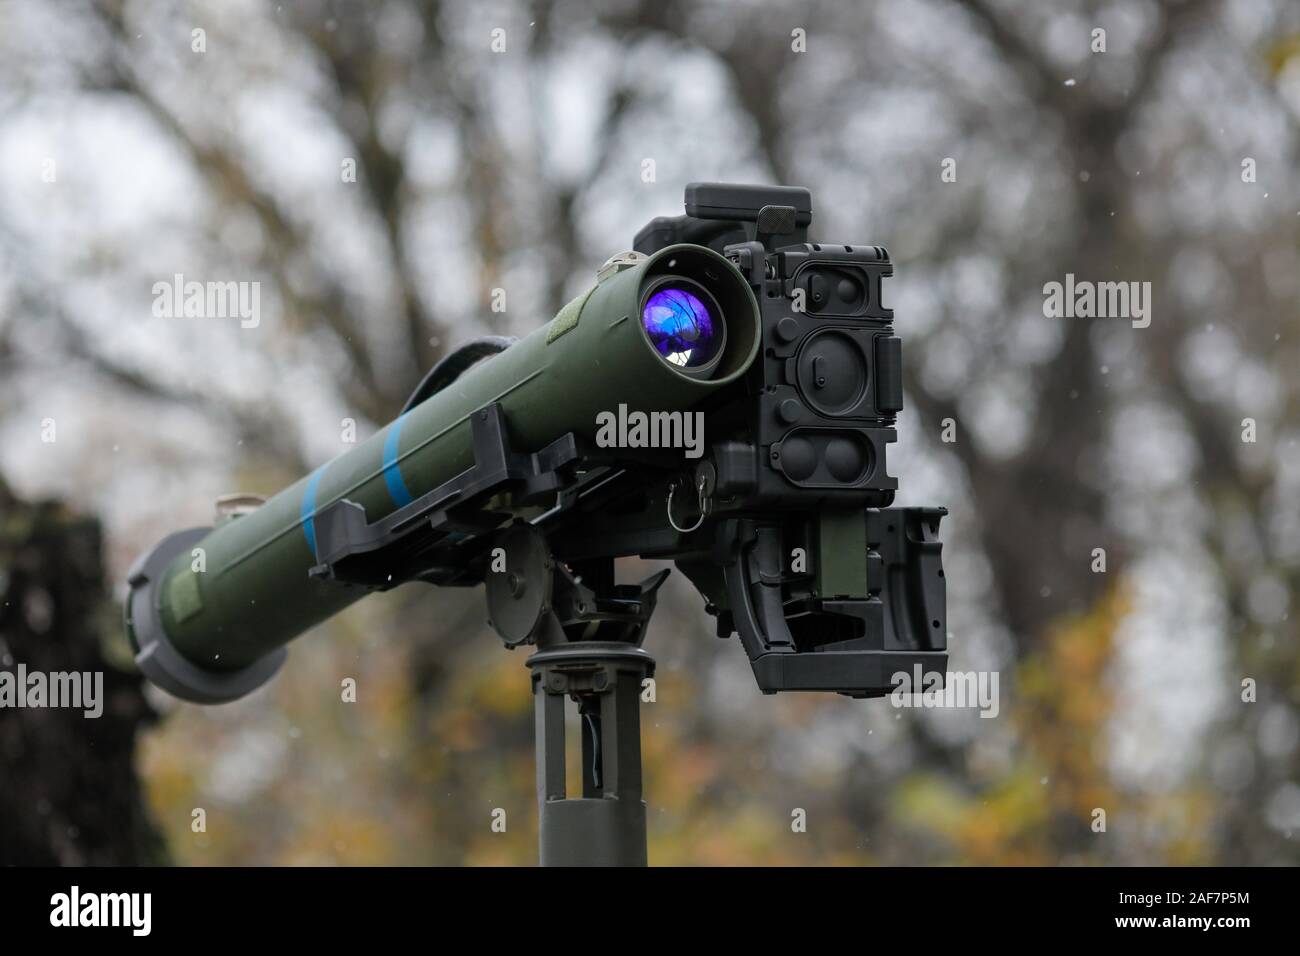 BUCHAREST, ROMANIA - December 1, 2019: TOW anti-tank guided missile on top of a Humvee, during the Romanian National Day military parade. Stock Photo